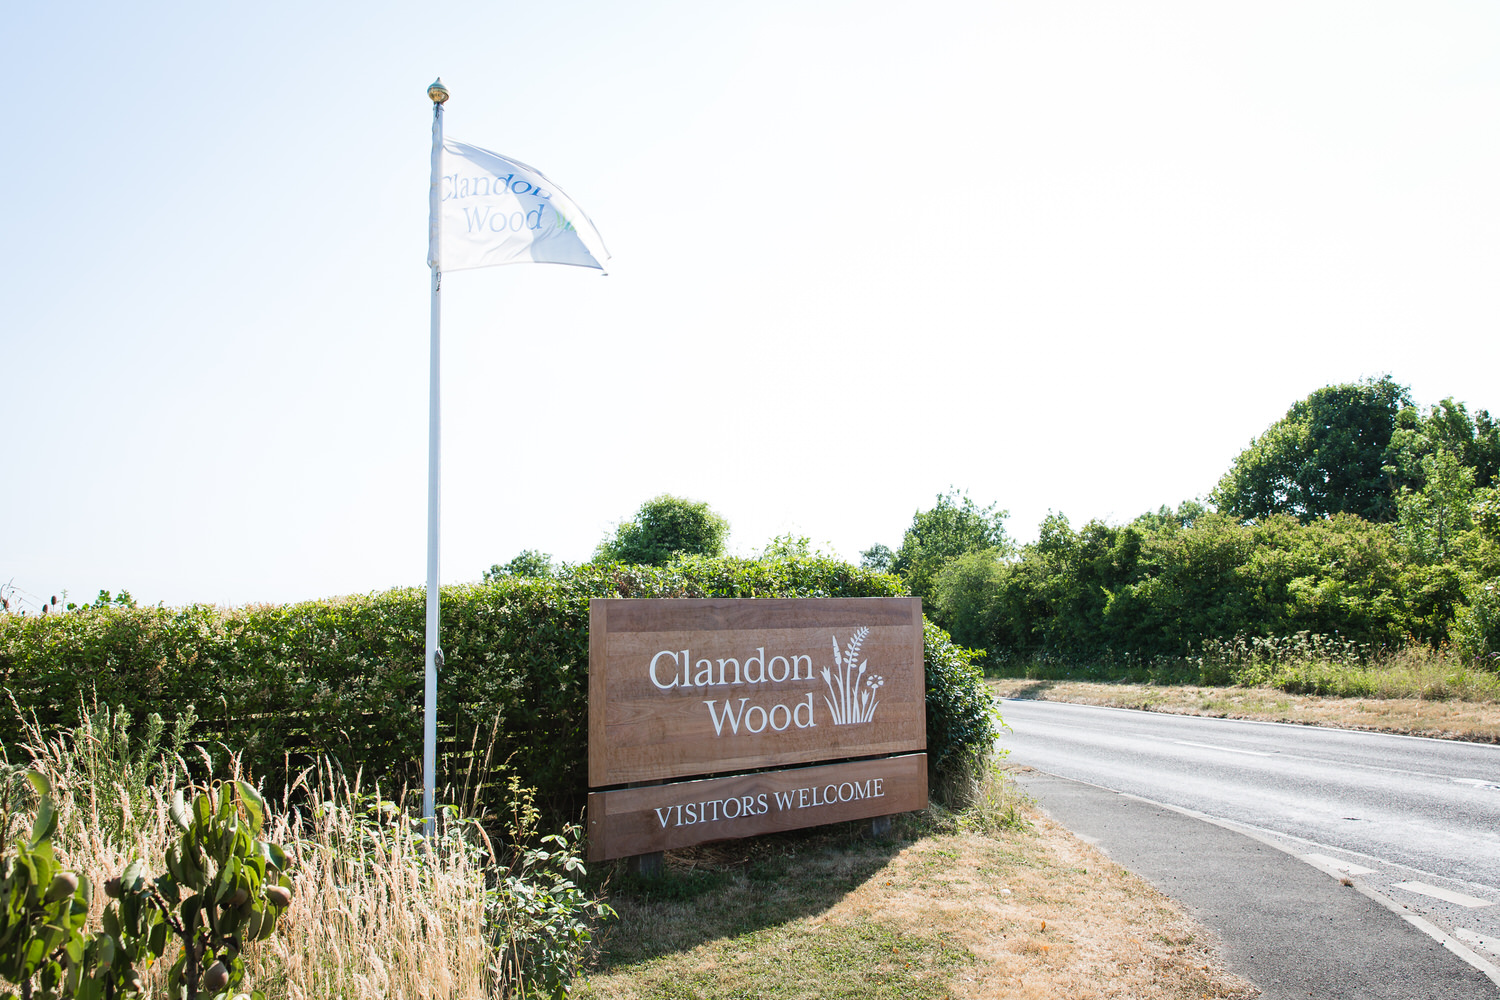  Clandon Wood Burial Grounds and Surrey Funeral Photographer 